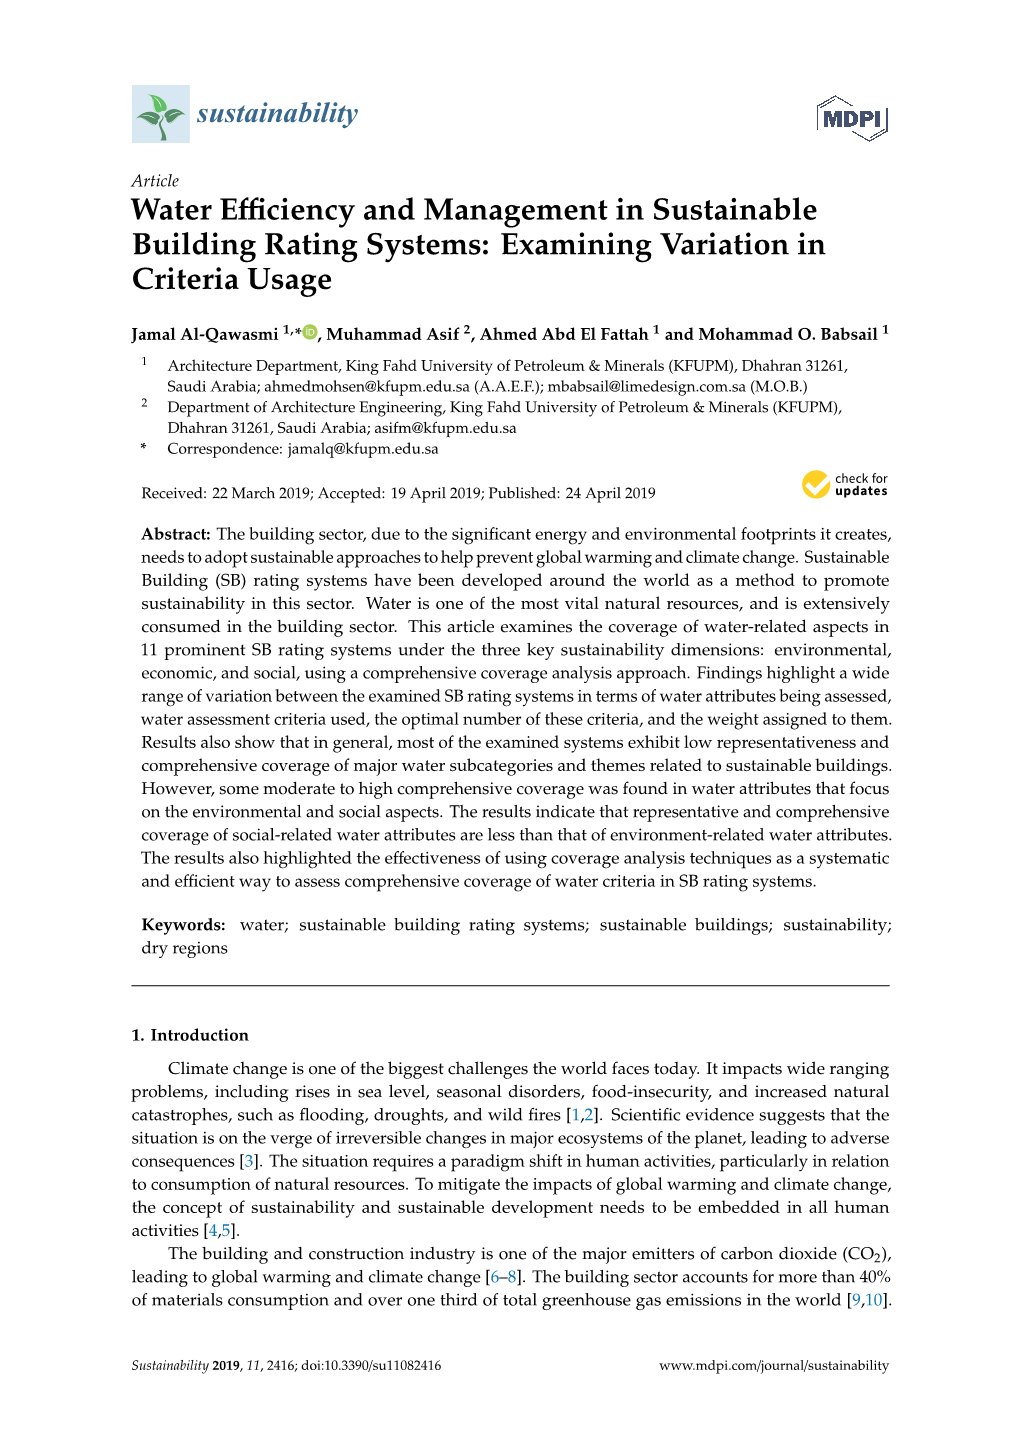 Water Efficiency and Management in Sustainable Building Rating Systems